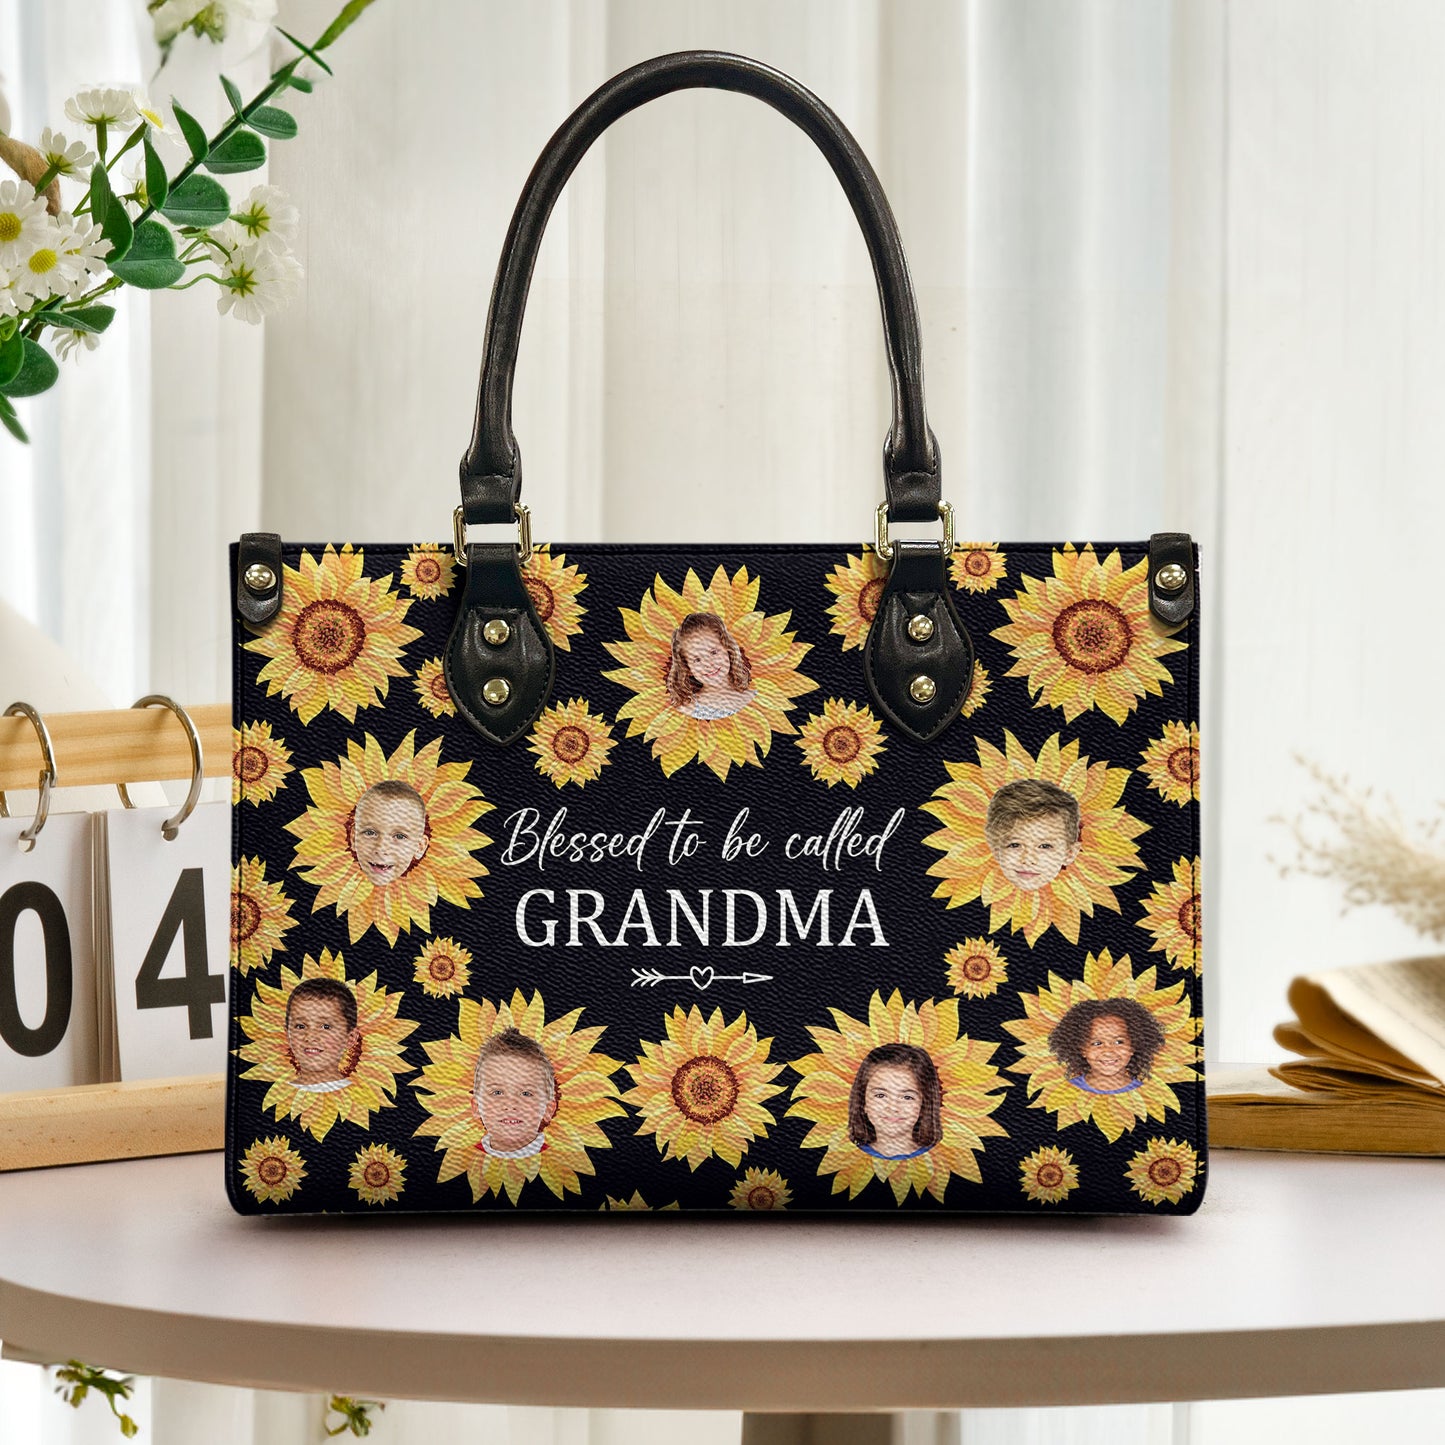 Blessed To Be Called Grandma - Personalized Photo Leather Bag